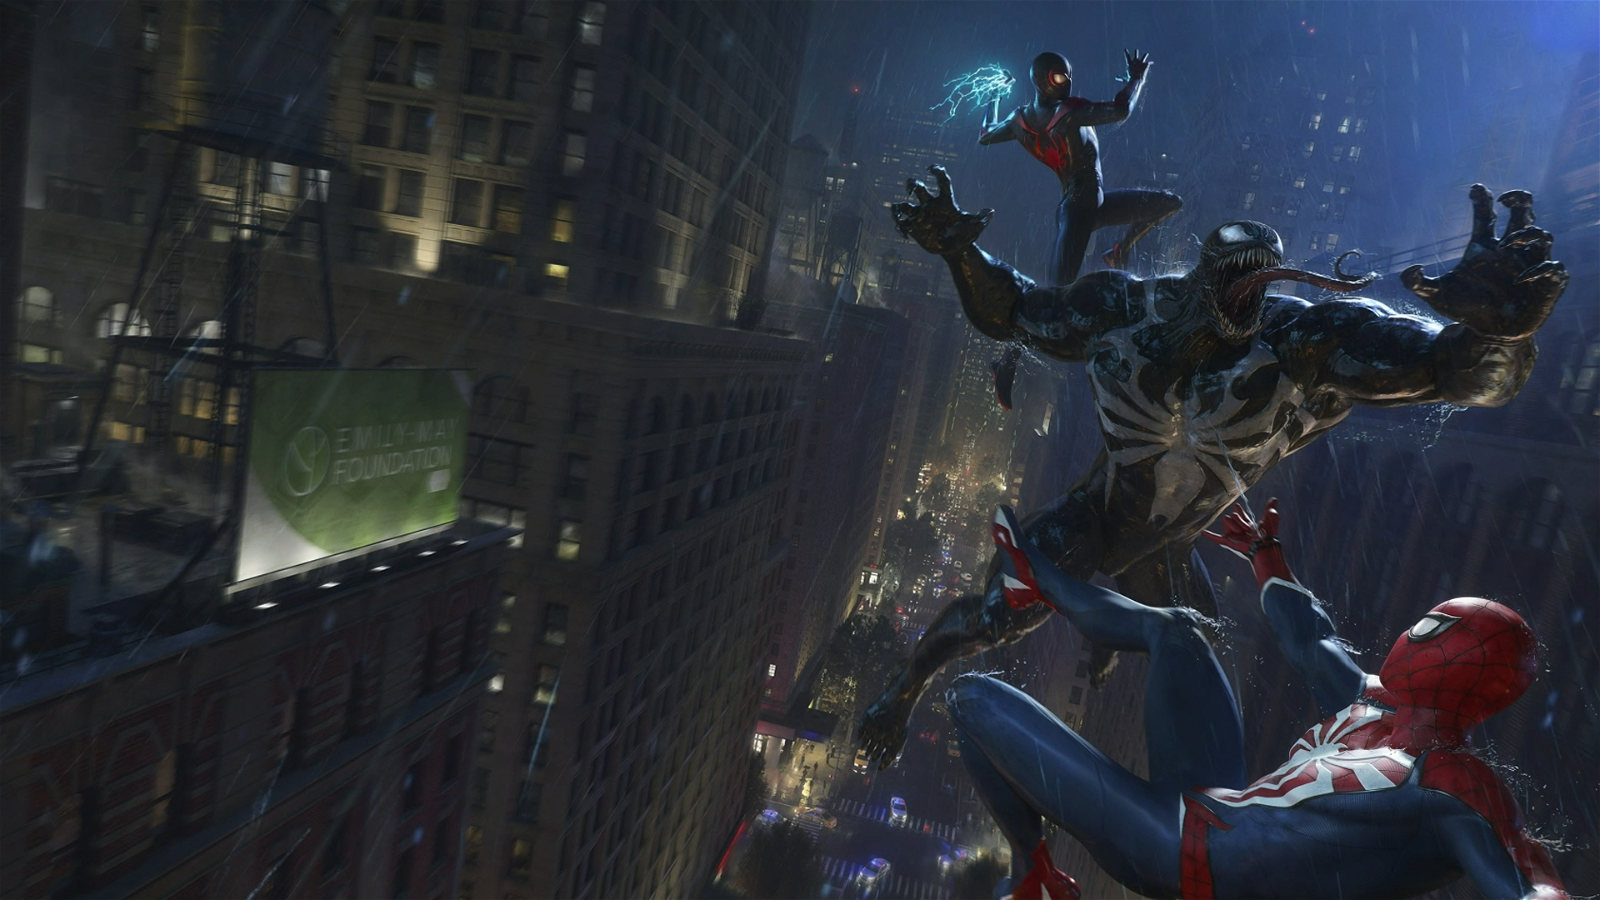 Peter Parker's Friendly Neighborhood Marvels Spider-Man 2 app lets players take on missions, interact with the community, and even save cats in distress.